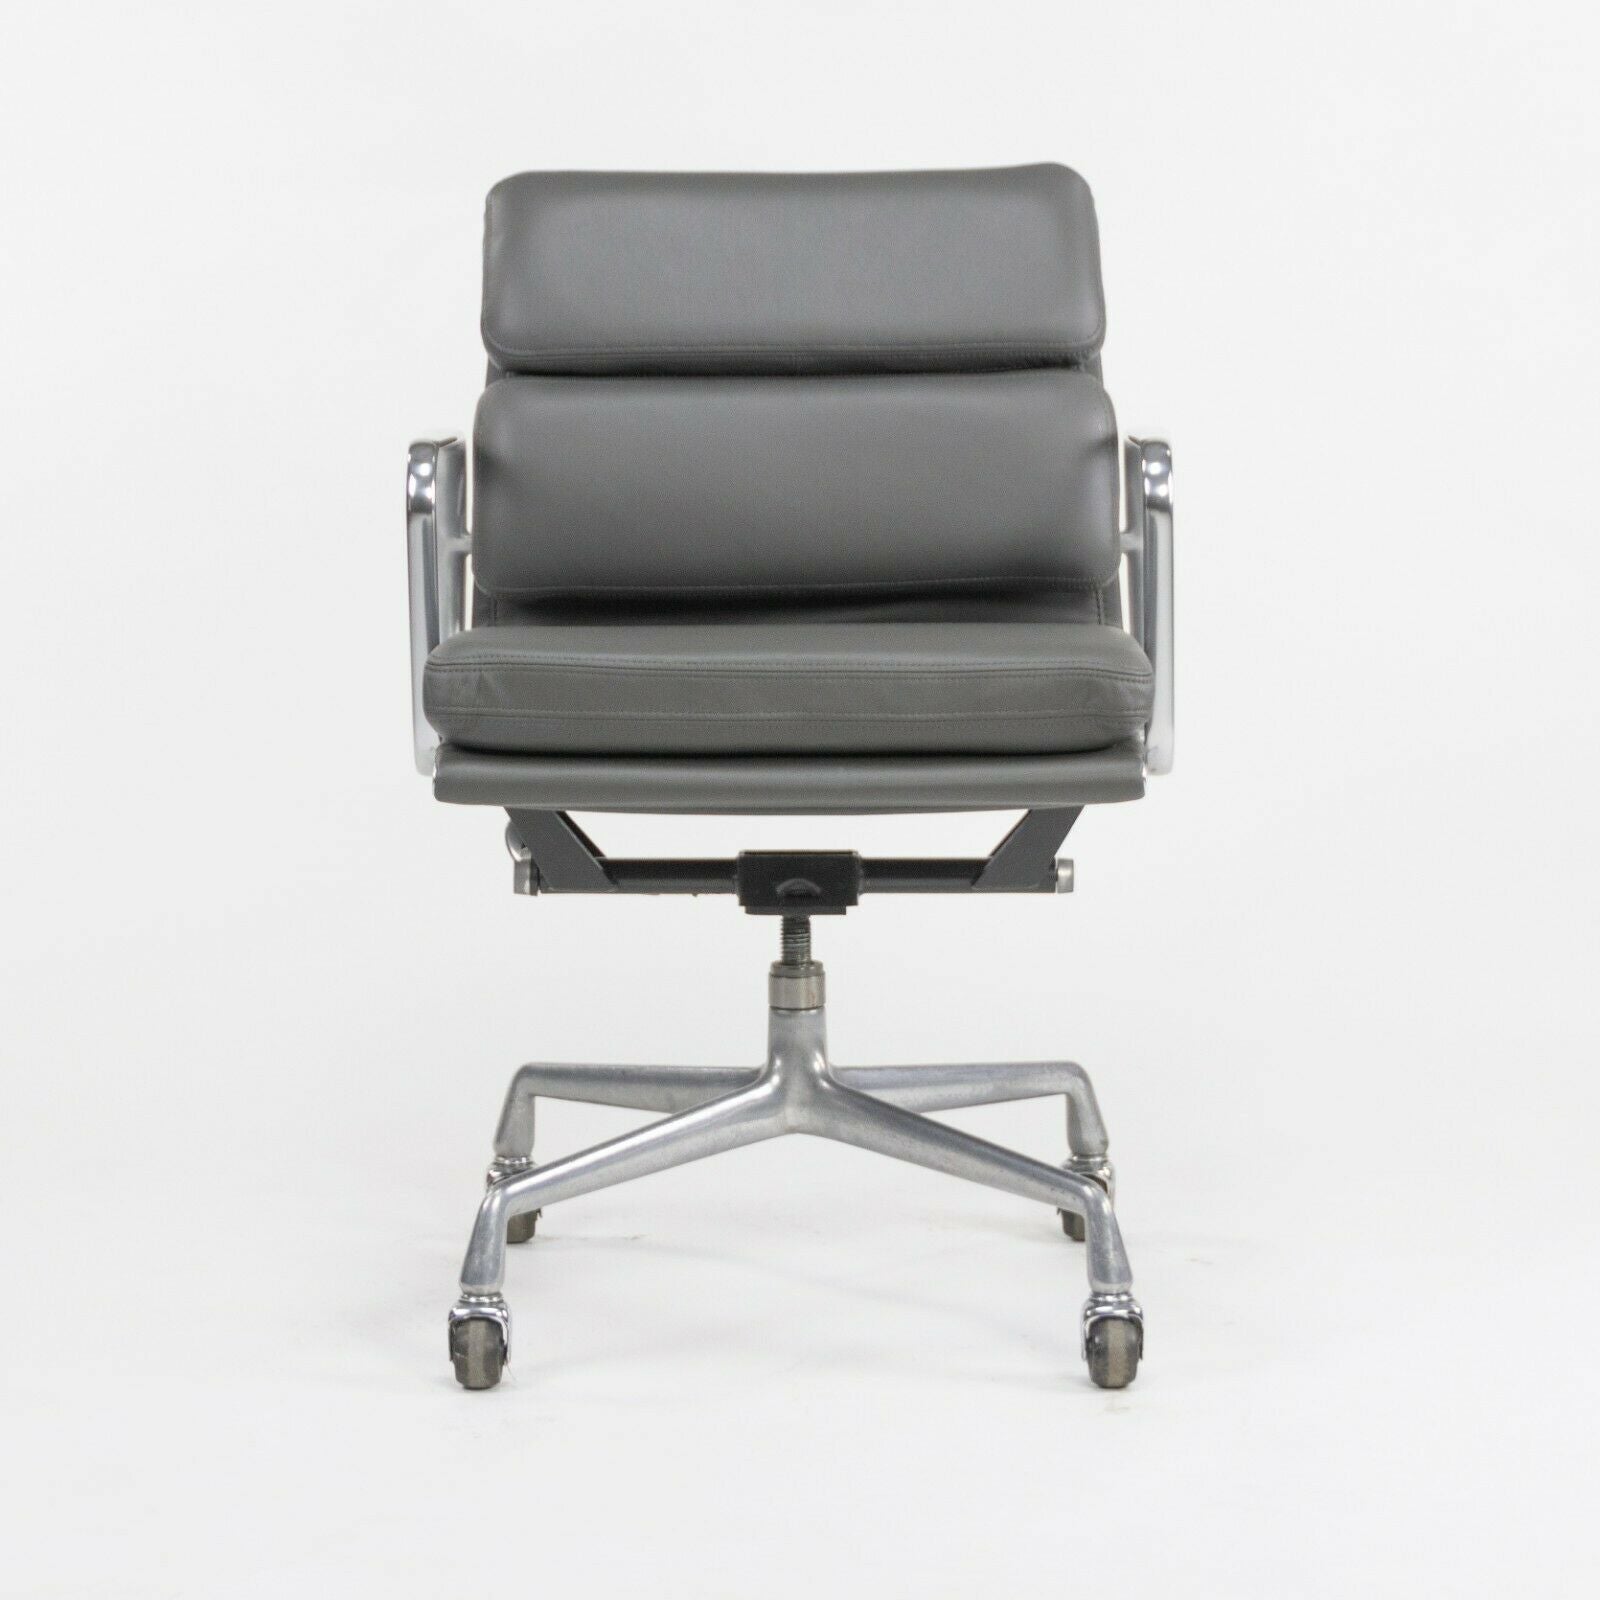 SOLD Herman Miller Eames Soft Pad Aluminum Group Management Desk Chair Gray Leather